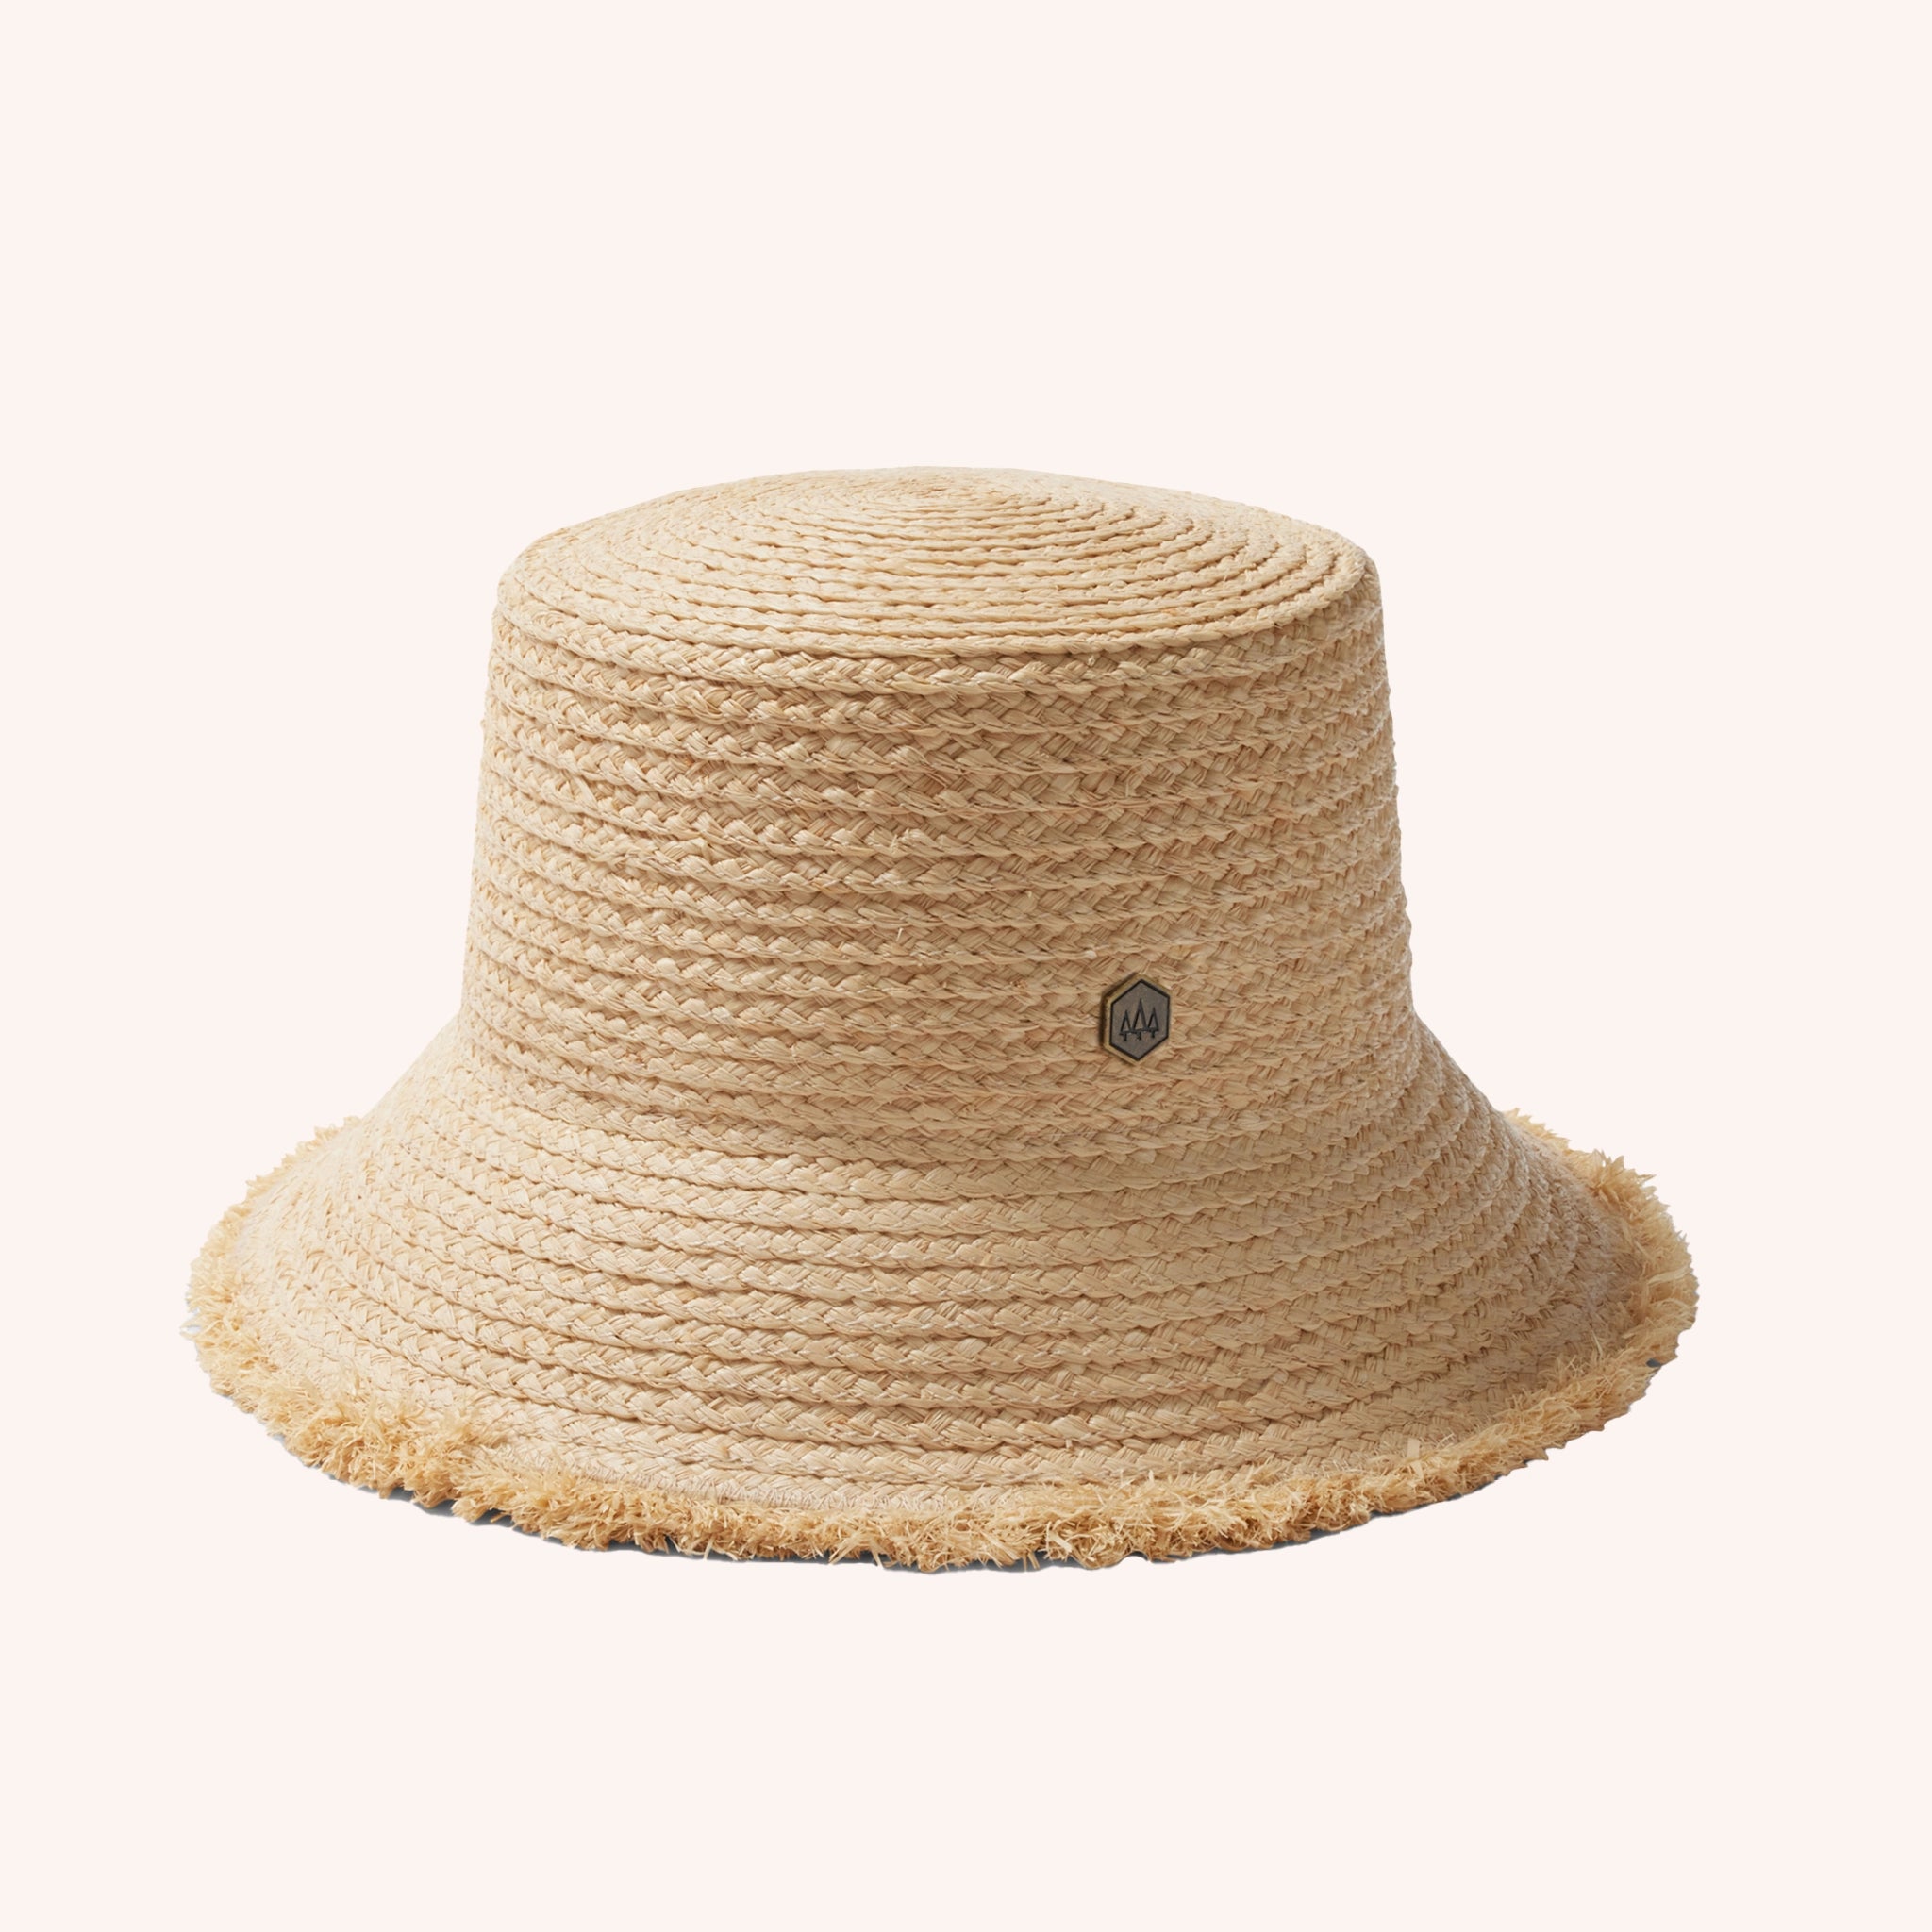 A woven bucket hat in a light straw color with a frayed edge detail along the edge of the brim and a tiny hemlock hat metal emblem in the center.